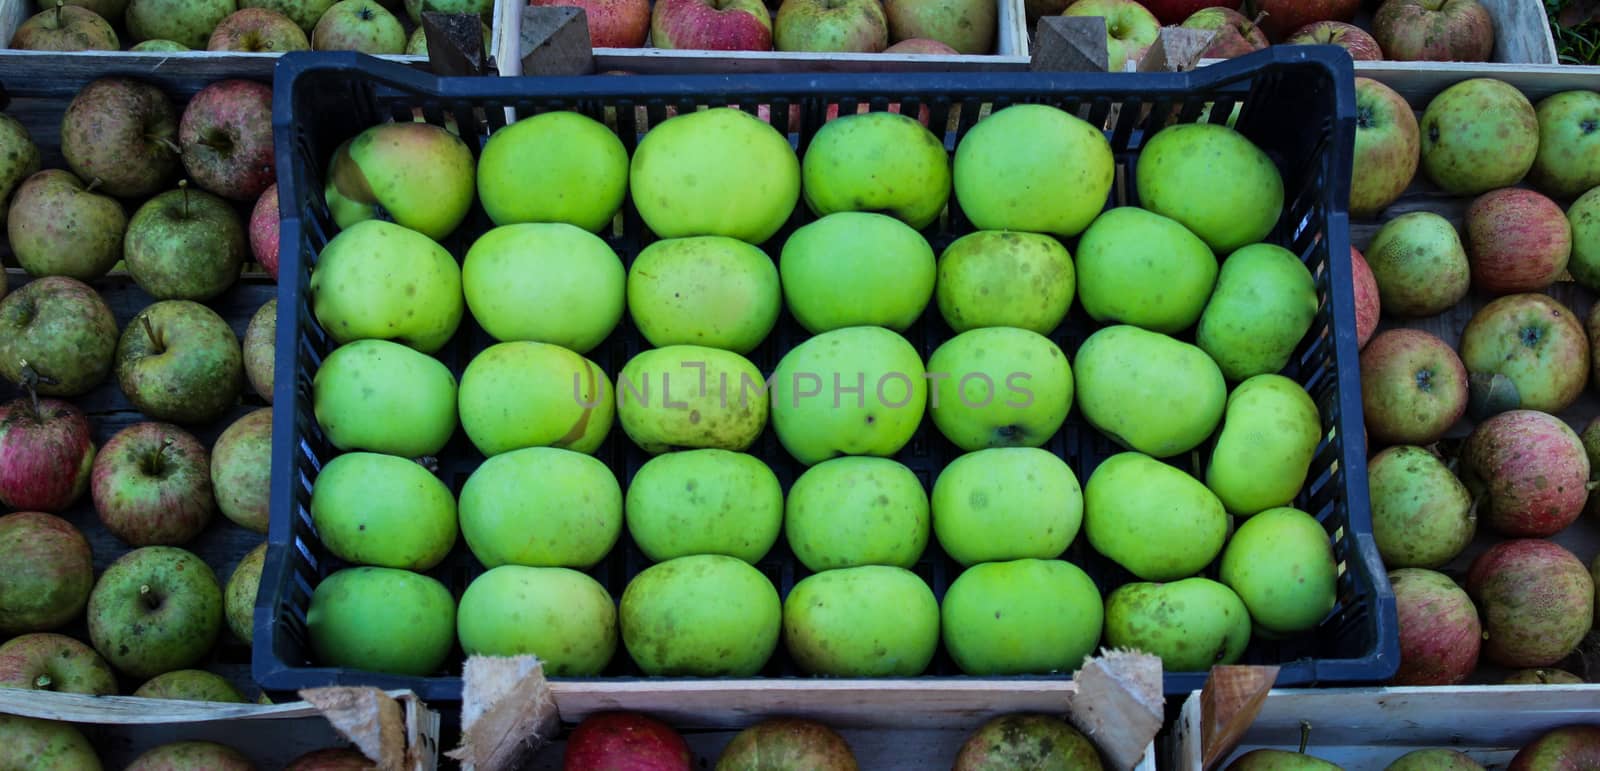 A crate of green apples in the middle among other red apples. by mahirrov